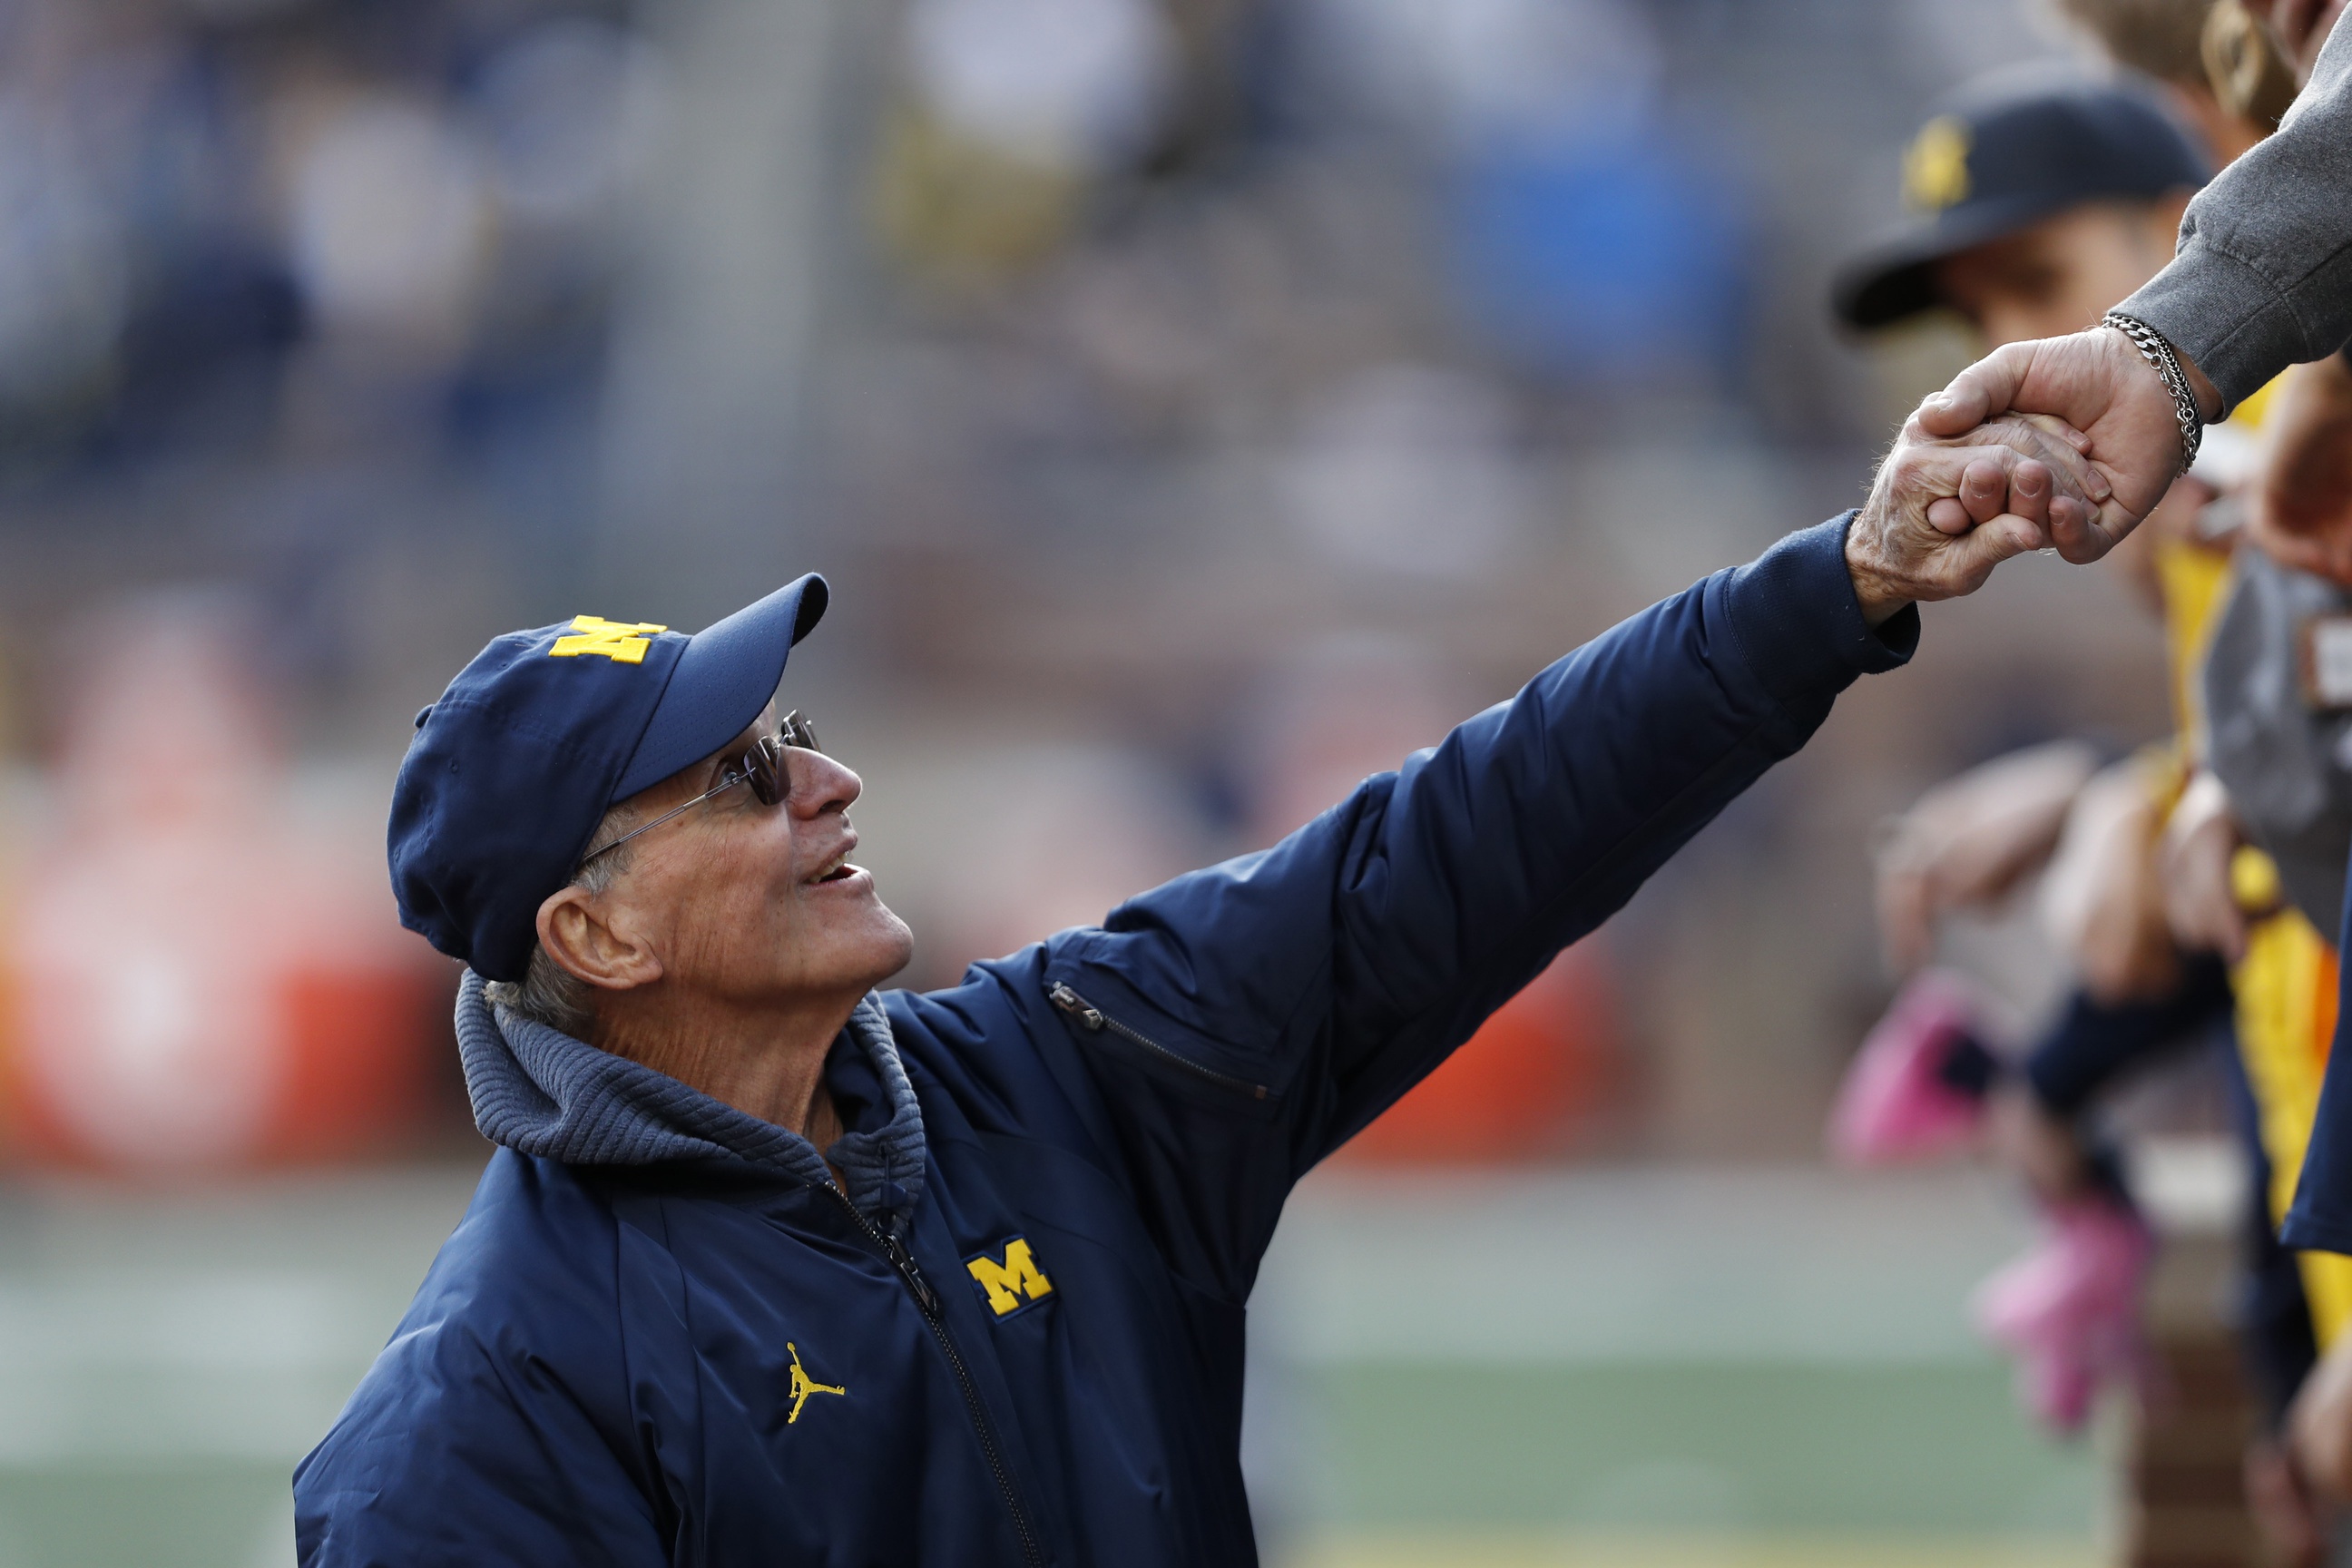 Jack Harbaugh, father of Michigan head coach Jim Harbaugh, shakes hands with Michigan fans